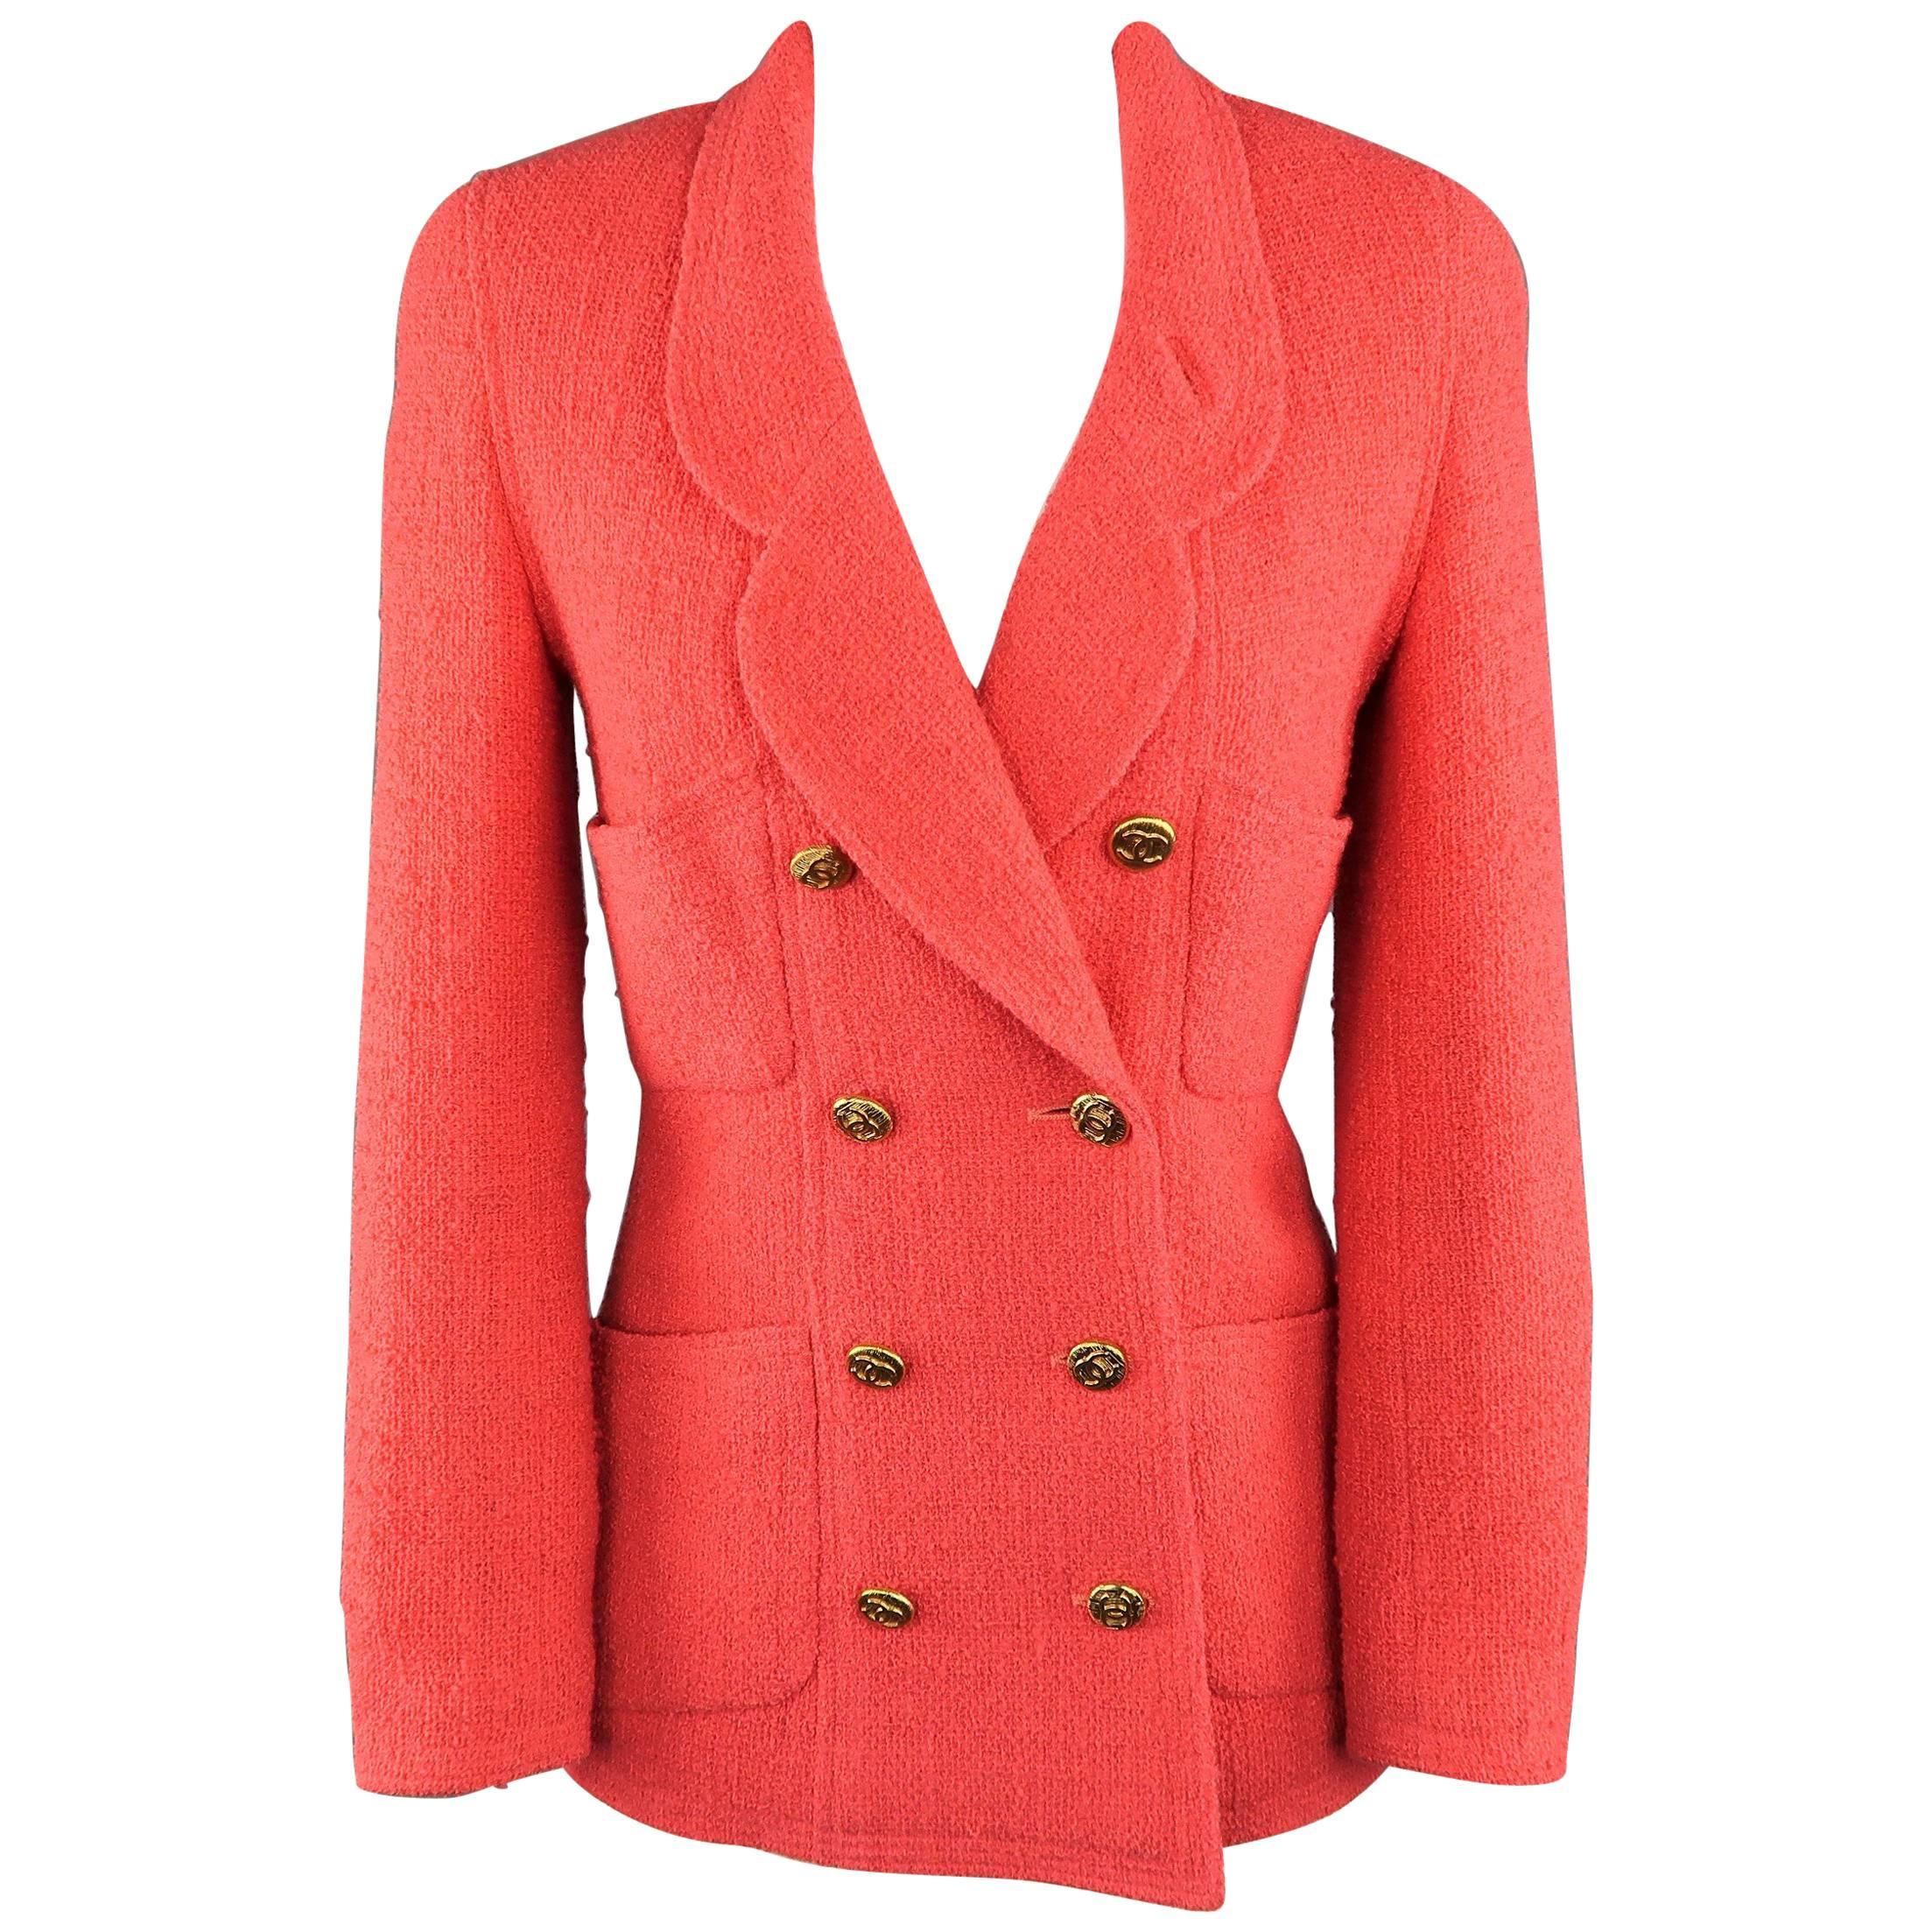 Chanel Jacket - Size 4 Coral Wool Boucle Double Breasted Gold Button Jacket